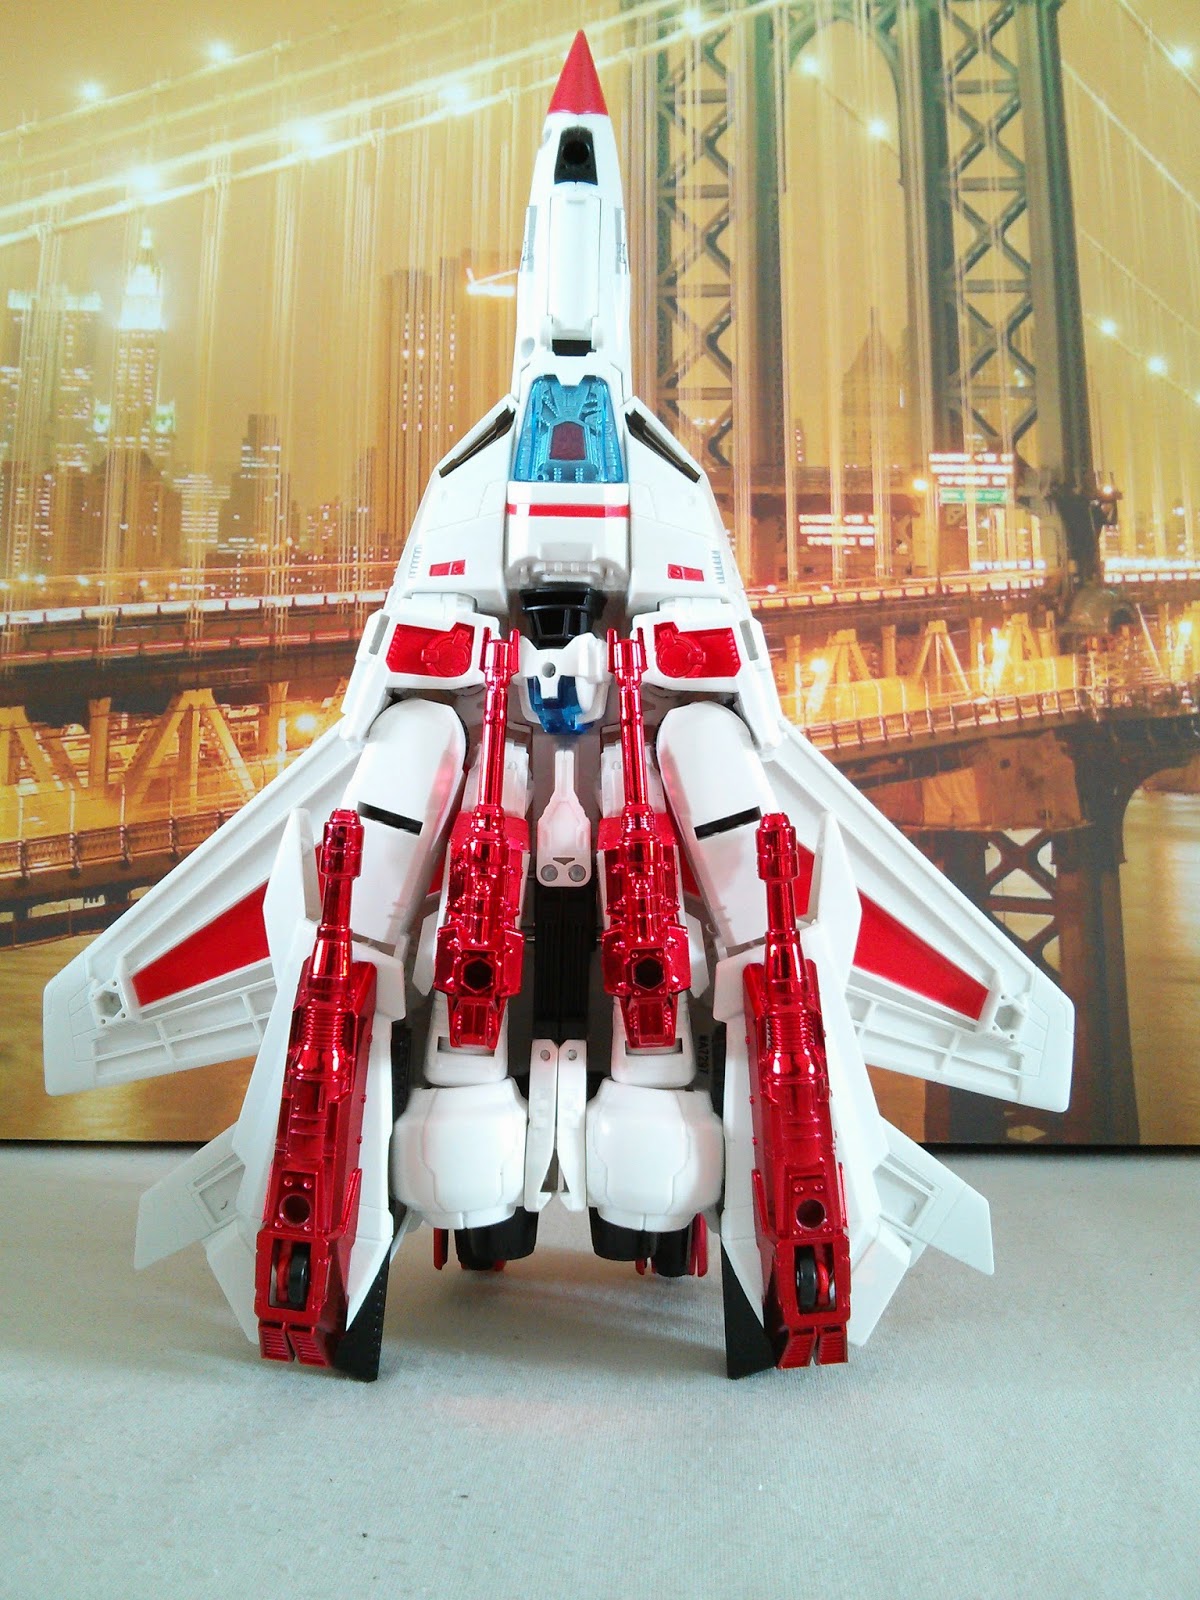 Transformers Generations leader jetfire undercarriage